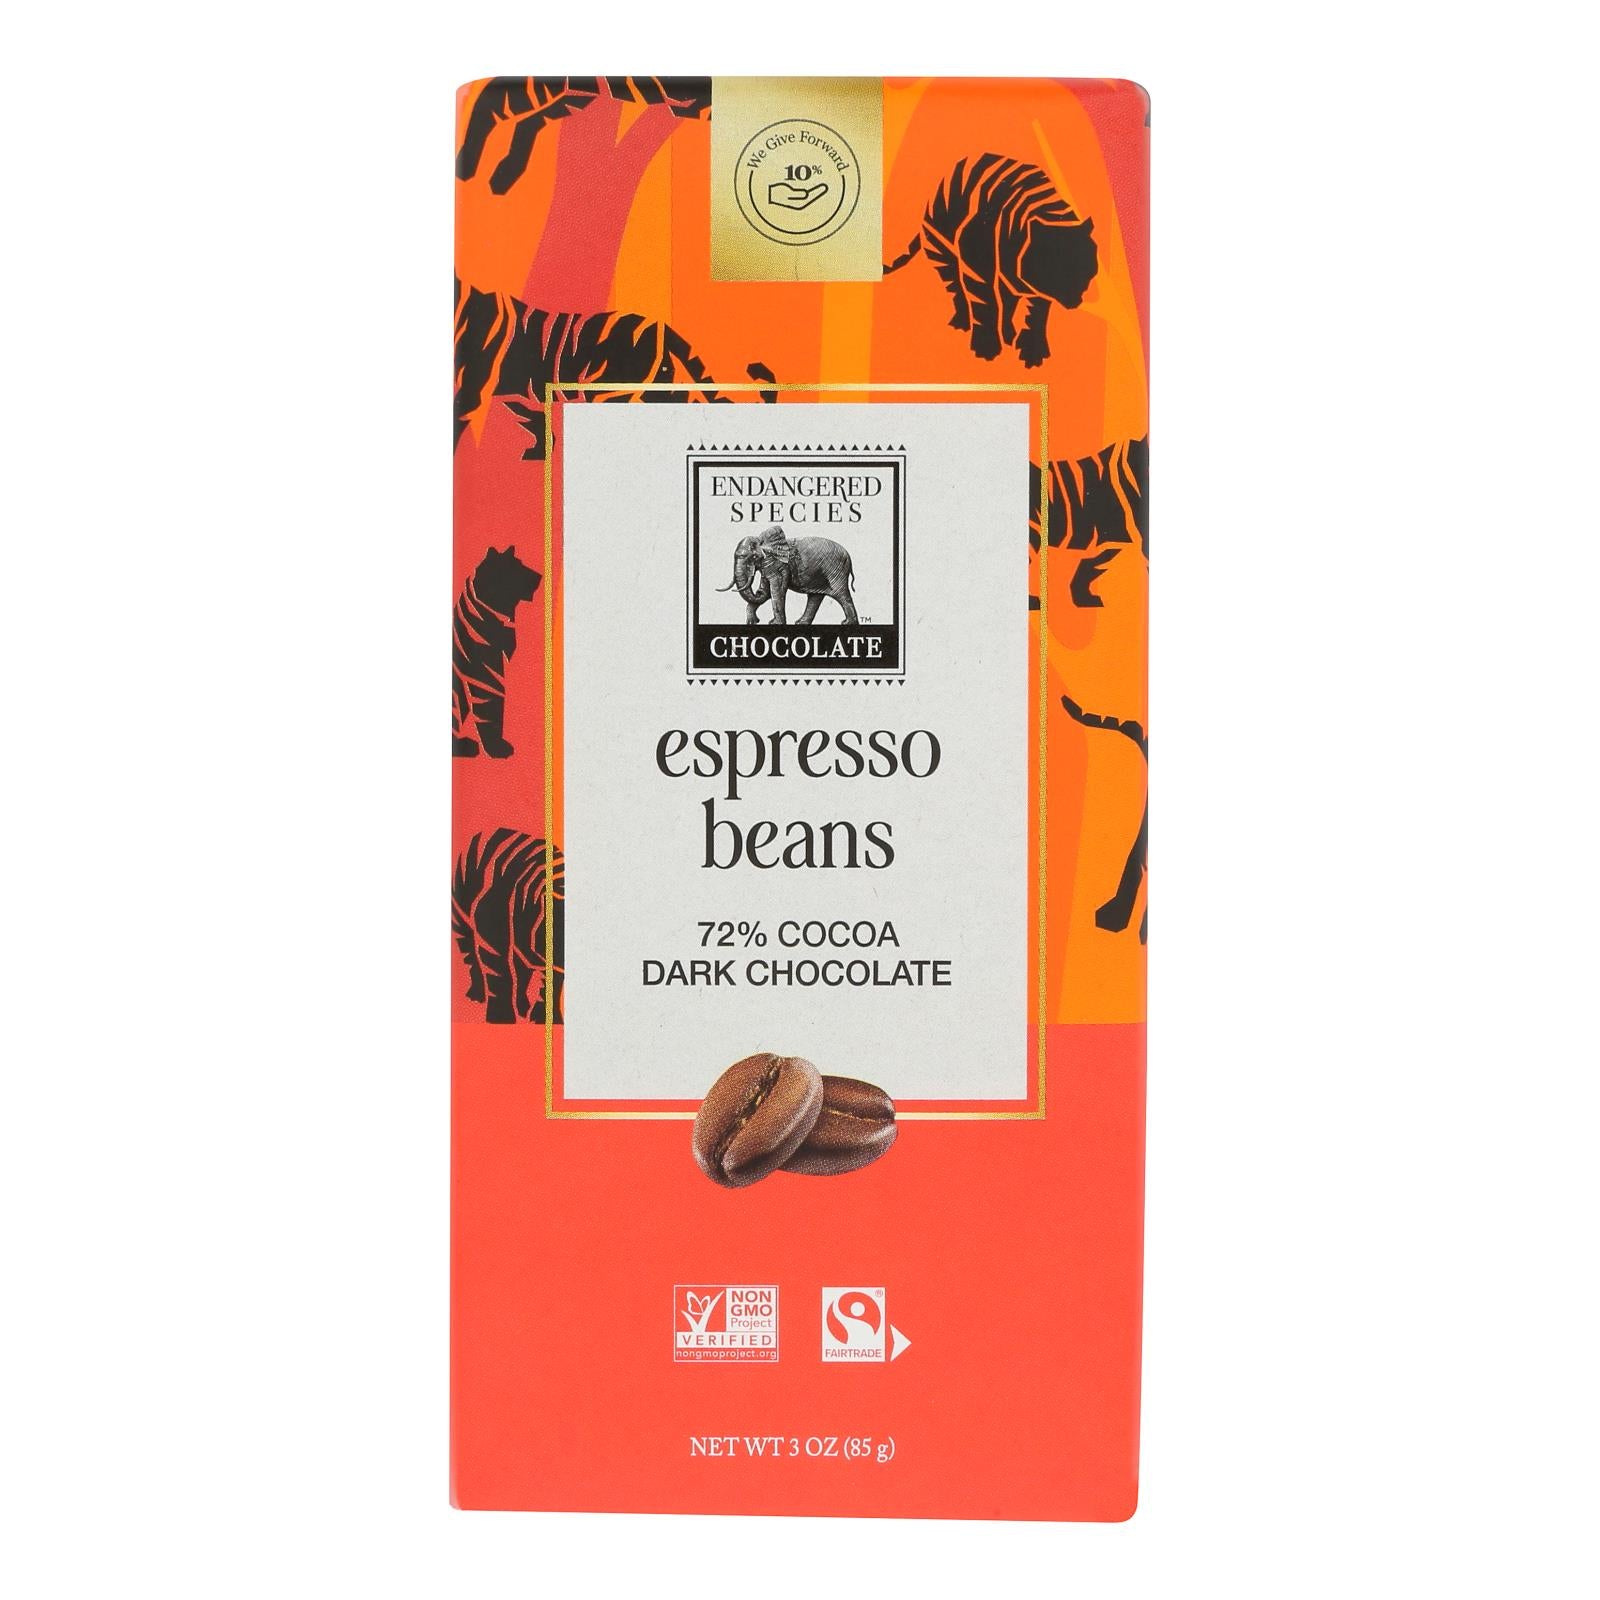 Endangered Species Natural Chocolate Bars - Dark Chocolate - 72 Percent Cocoa - Espresso Beans - 3 oz Bars - Case of 12